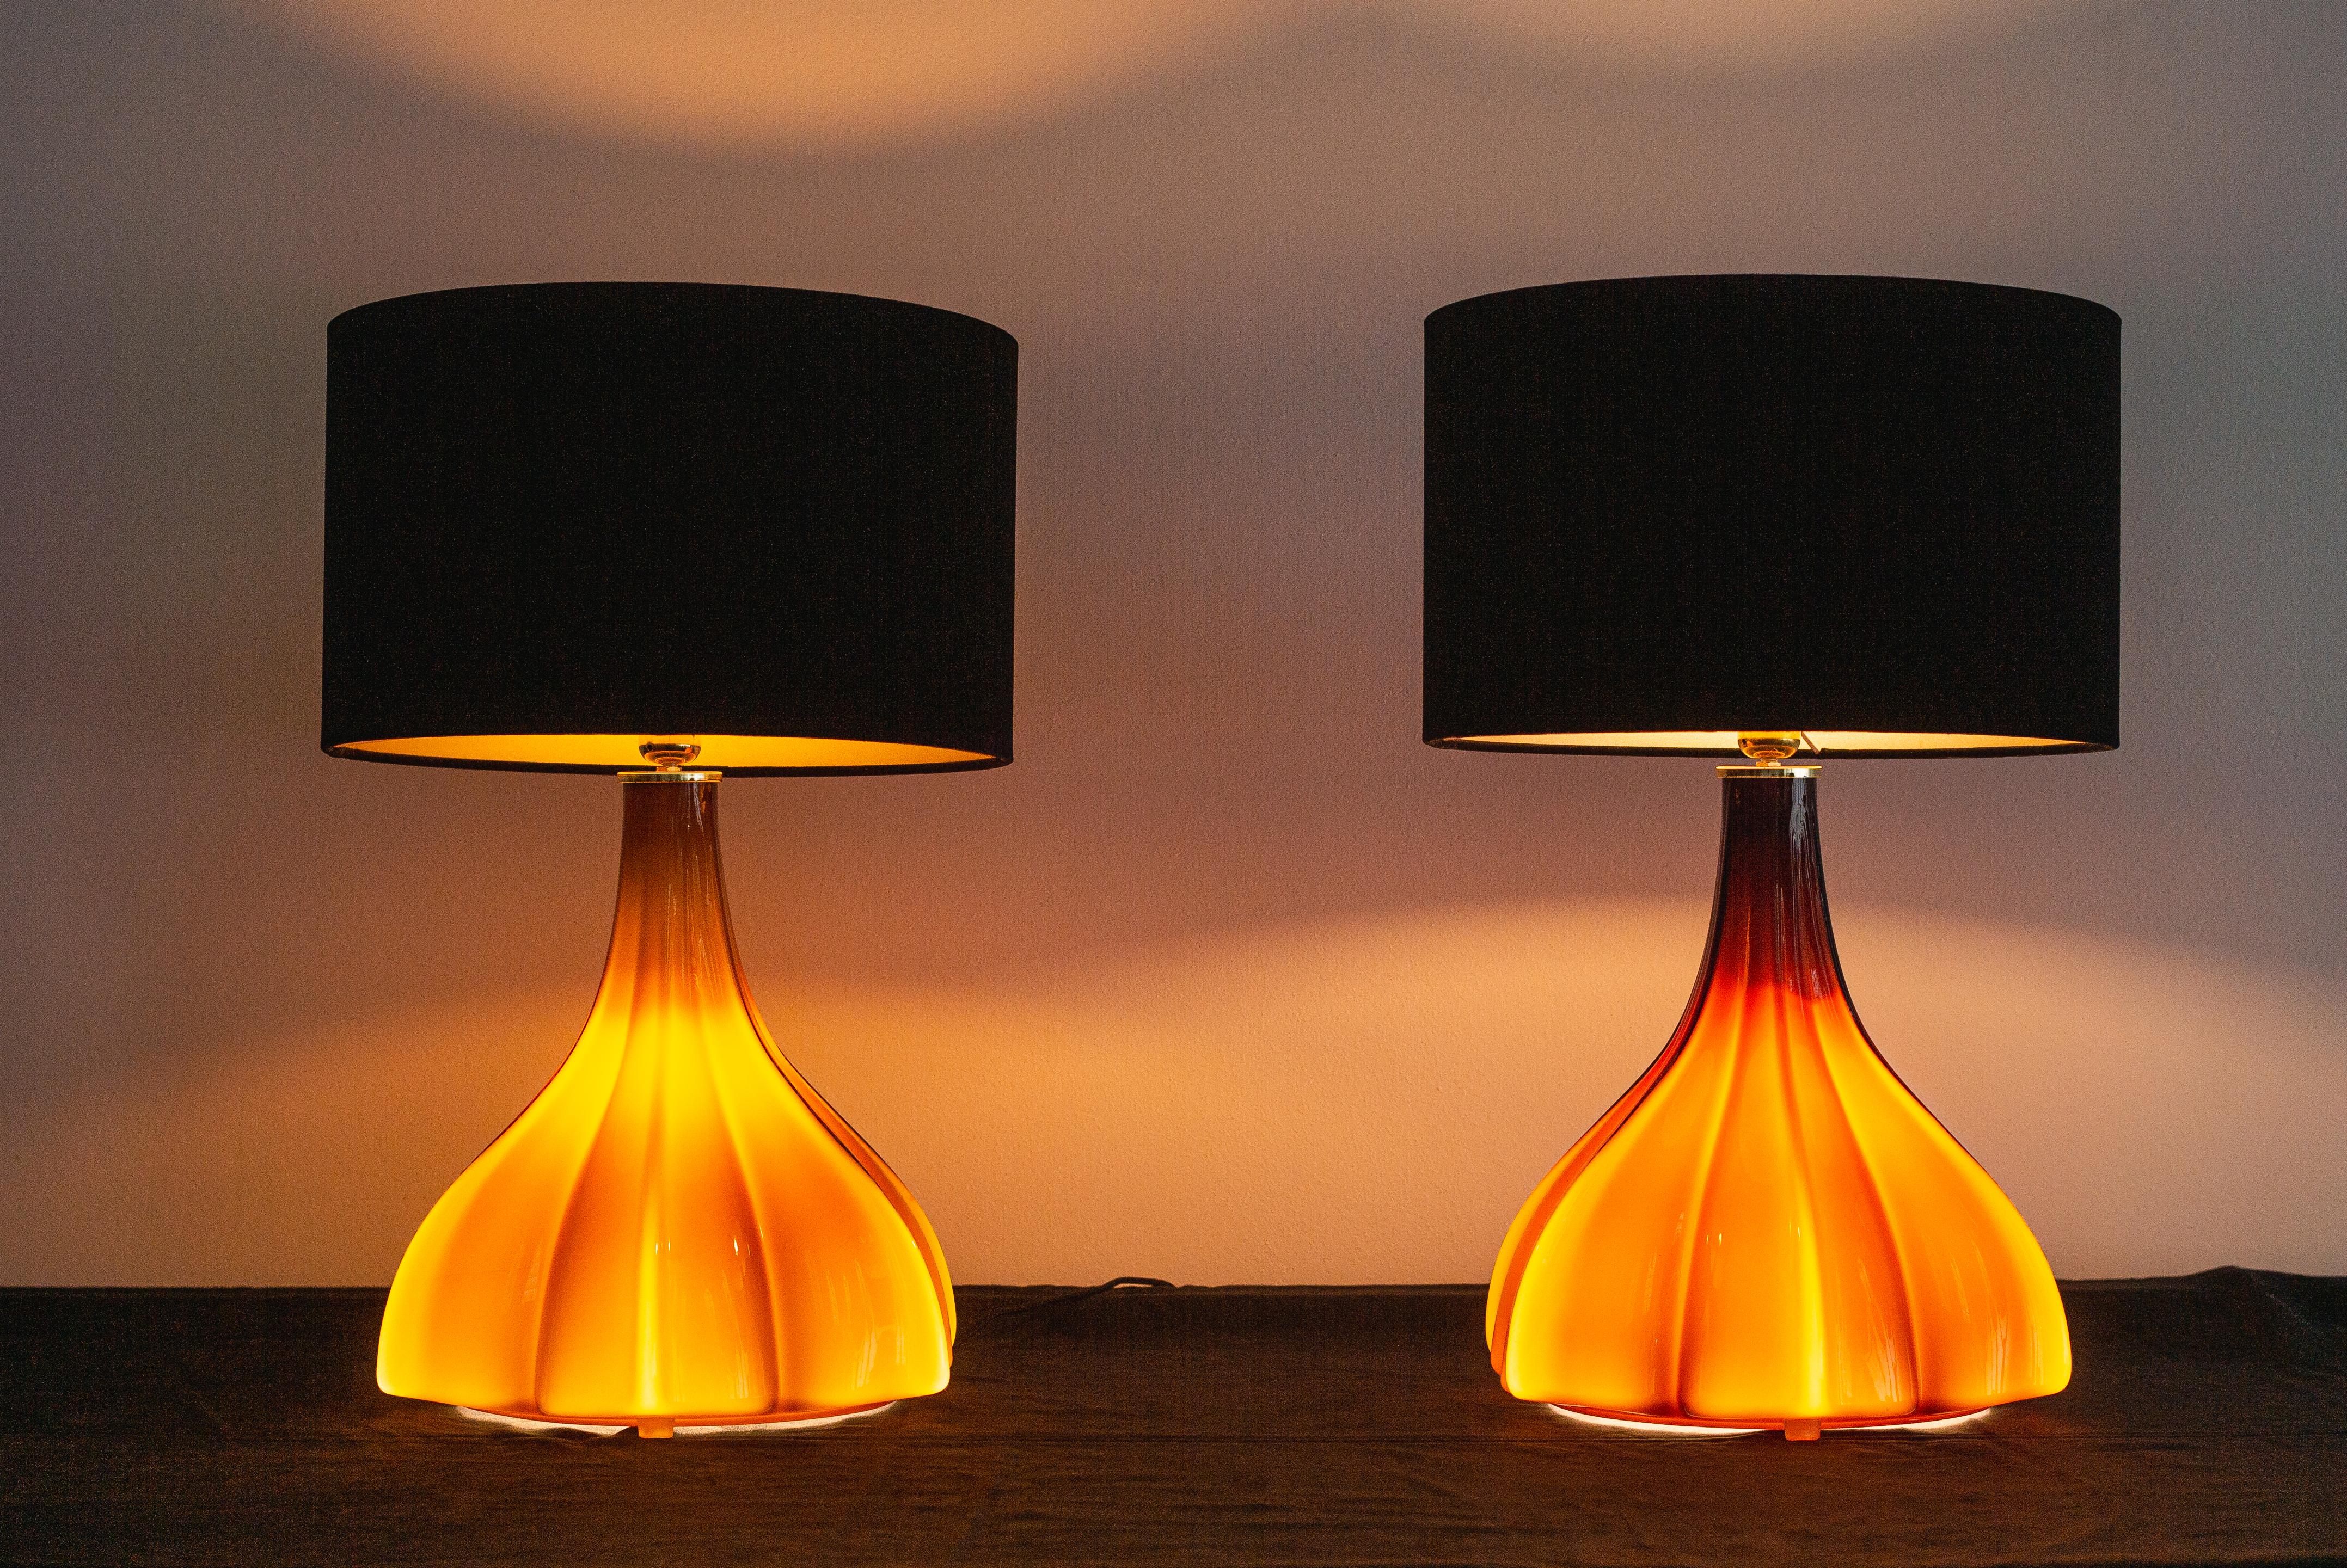 These 1970s lights are a true work of art. The artisan glass blowers made thes by hand. They consist of two layers.. White opaline inside and brown / caramel glass on the outside. They come with new black velvet shades.
These Peill & Putzler Lamps